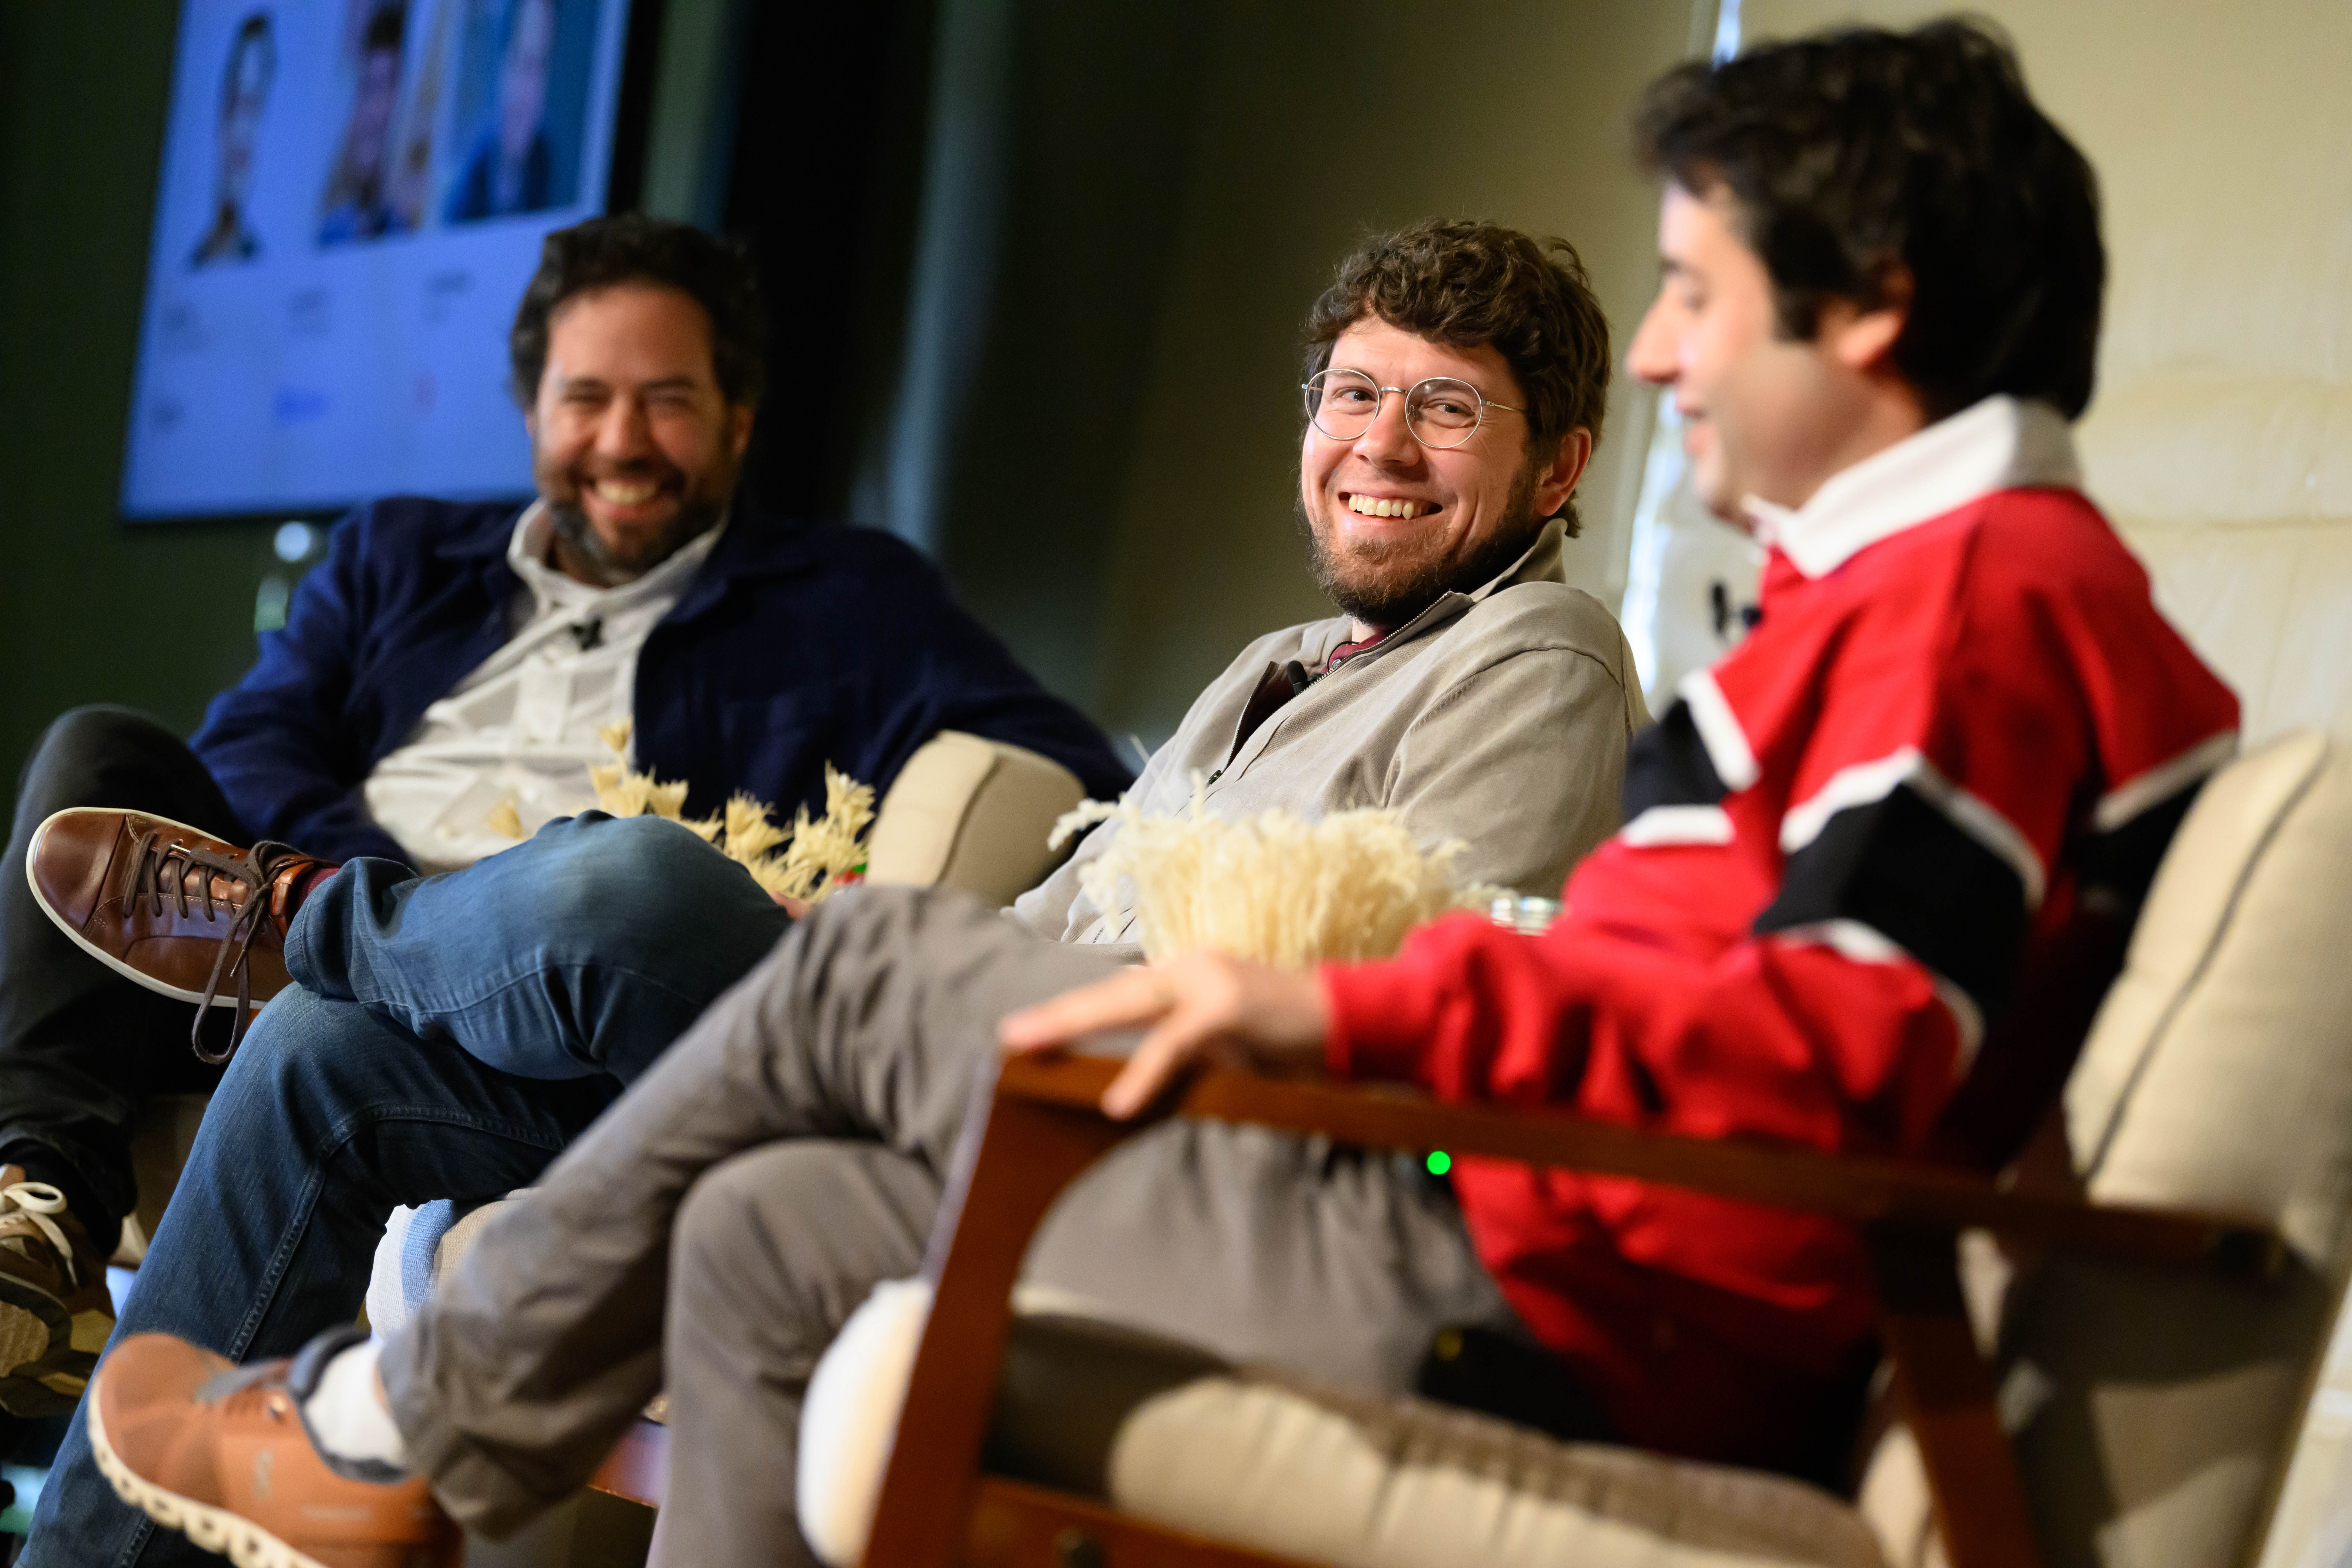 Dylan Field (right) of Figma with Jason Citron (center) of Discord and Danny Rimer (left) of Index Ventures.